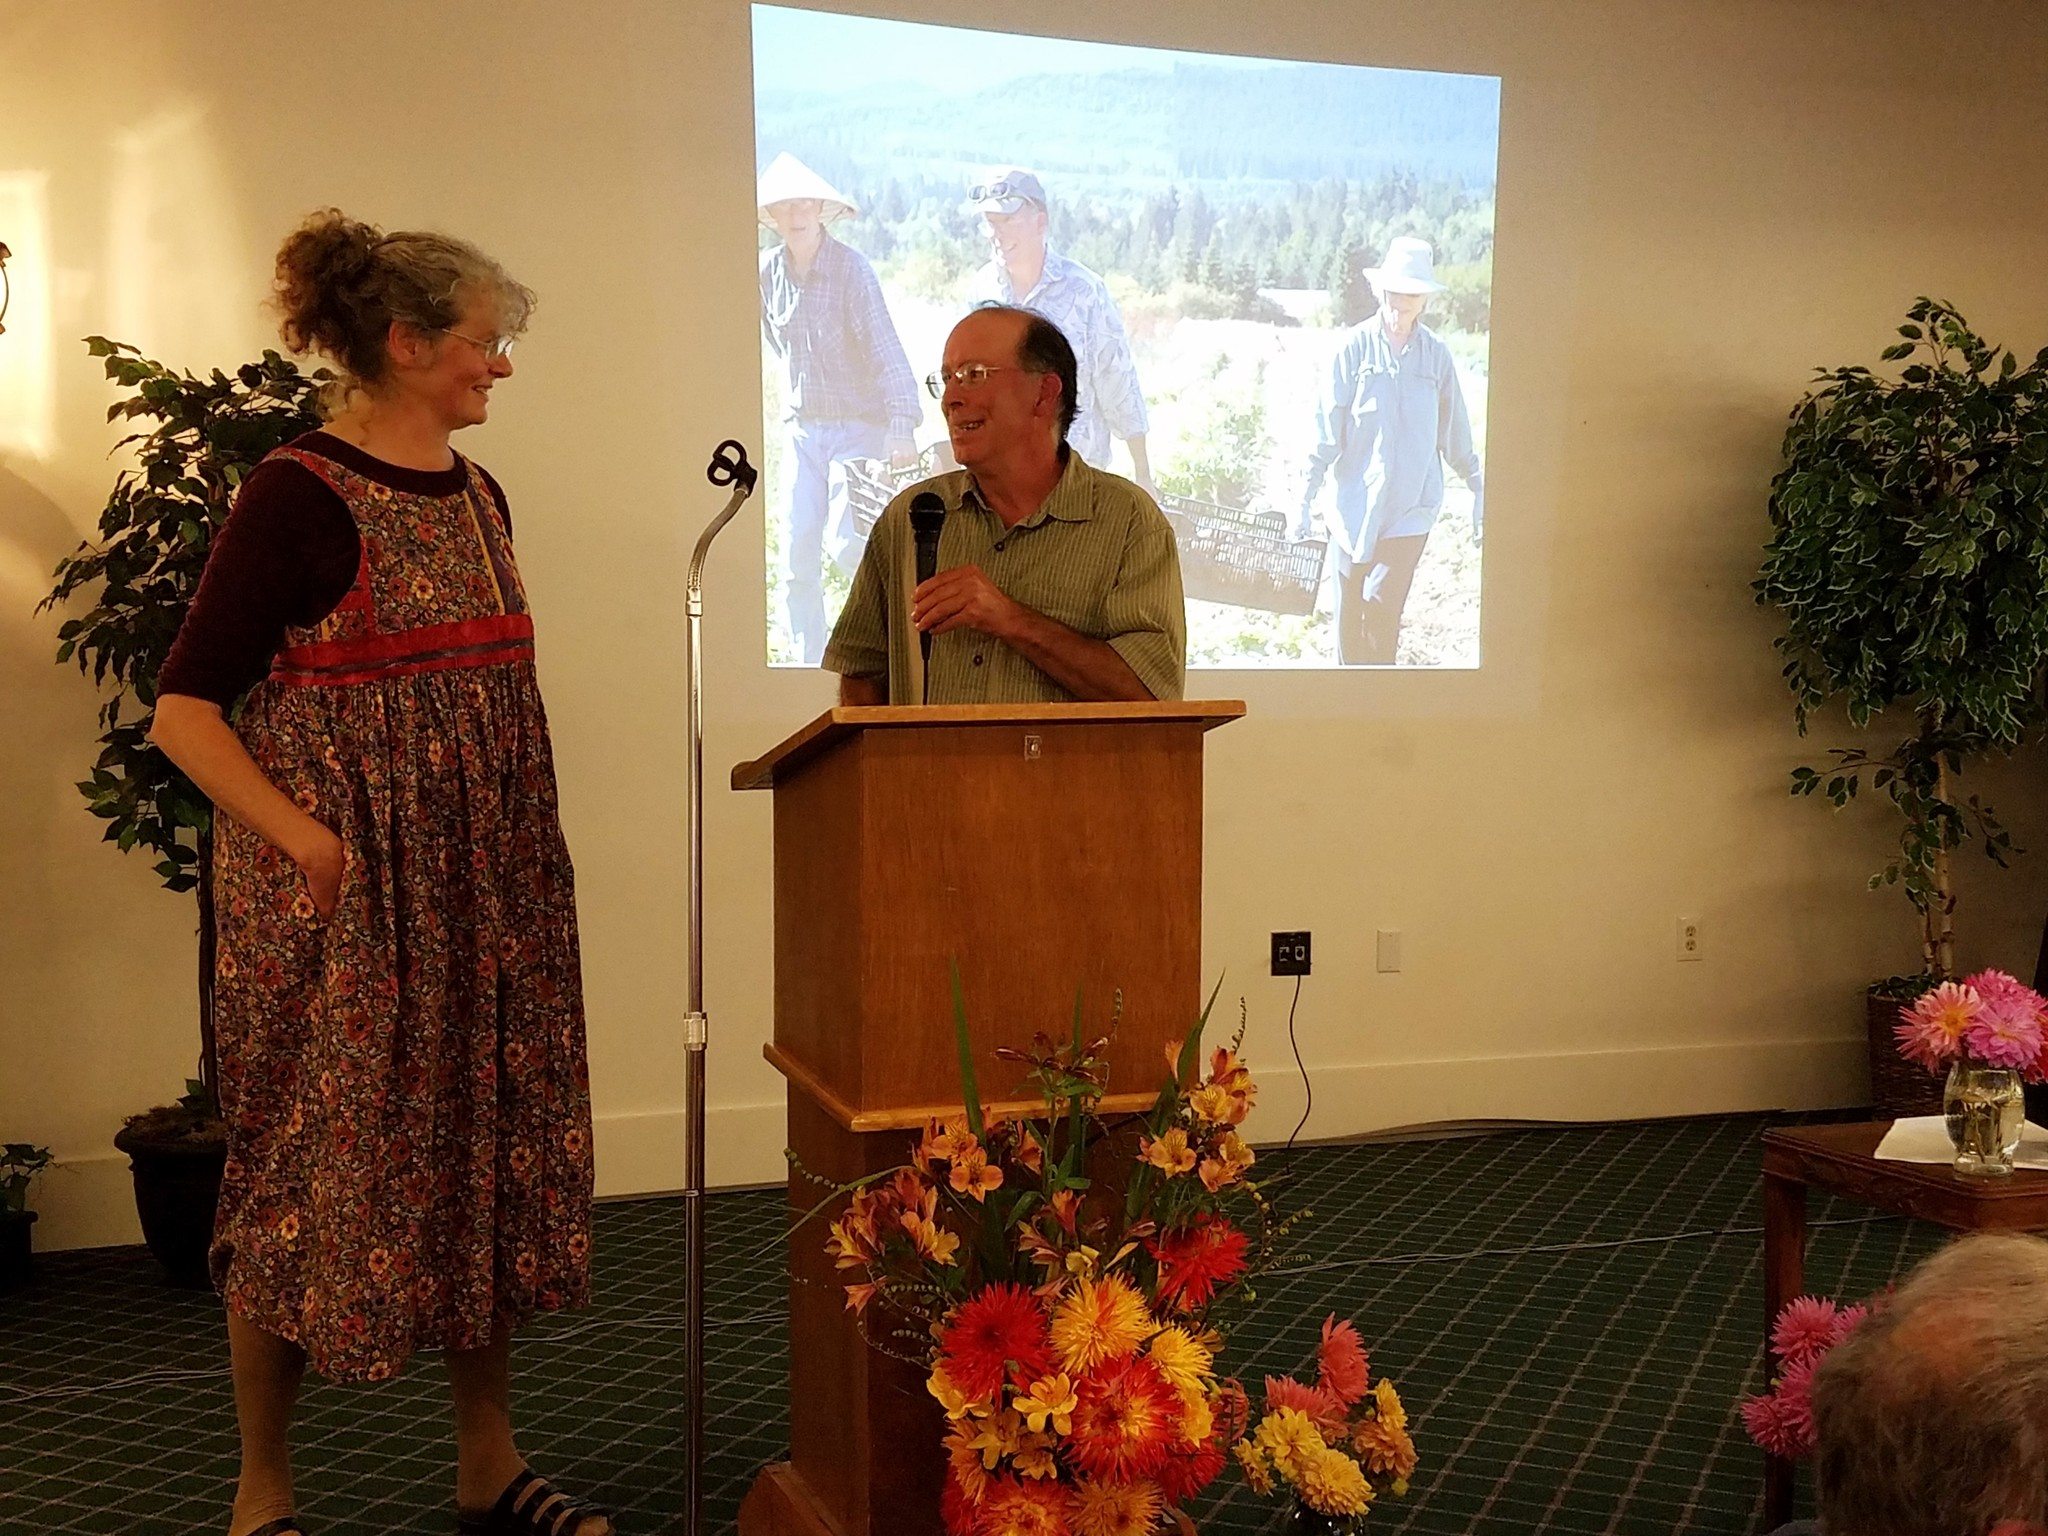 Owners of Salt Creek Farm Lee Norton and Doug Hendrickson on stage at Harvest Dinner to receive the 2016 Farmer of the Year award for their work to foster CSA across Clallam County. Submitted photo